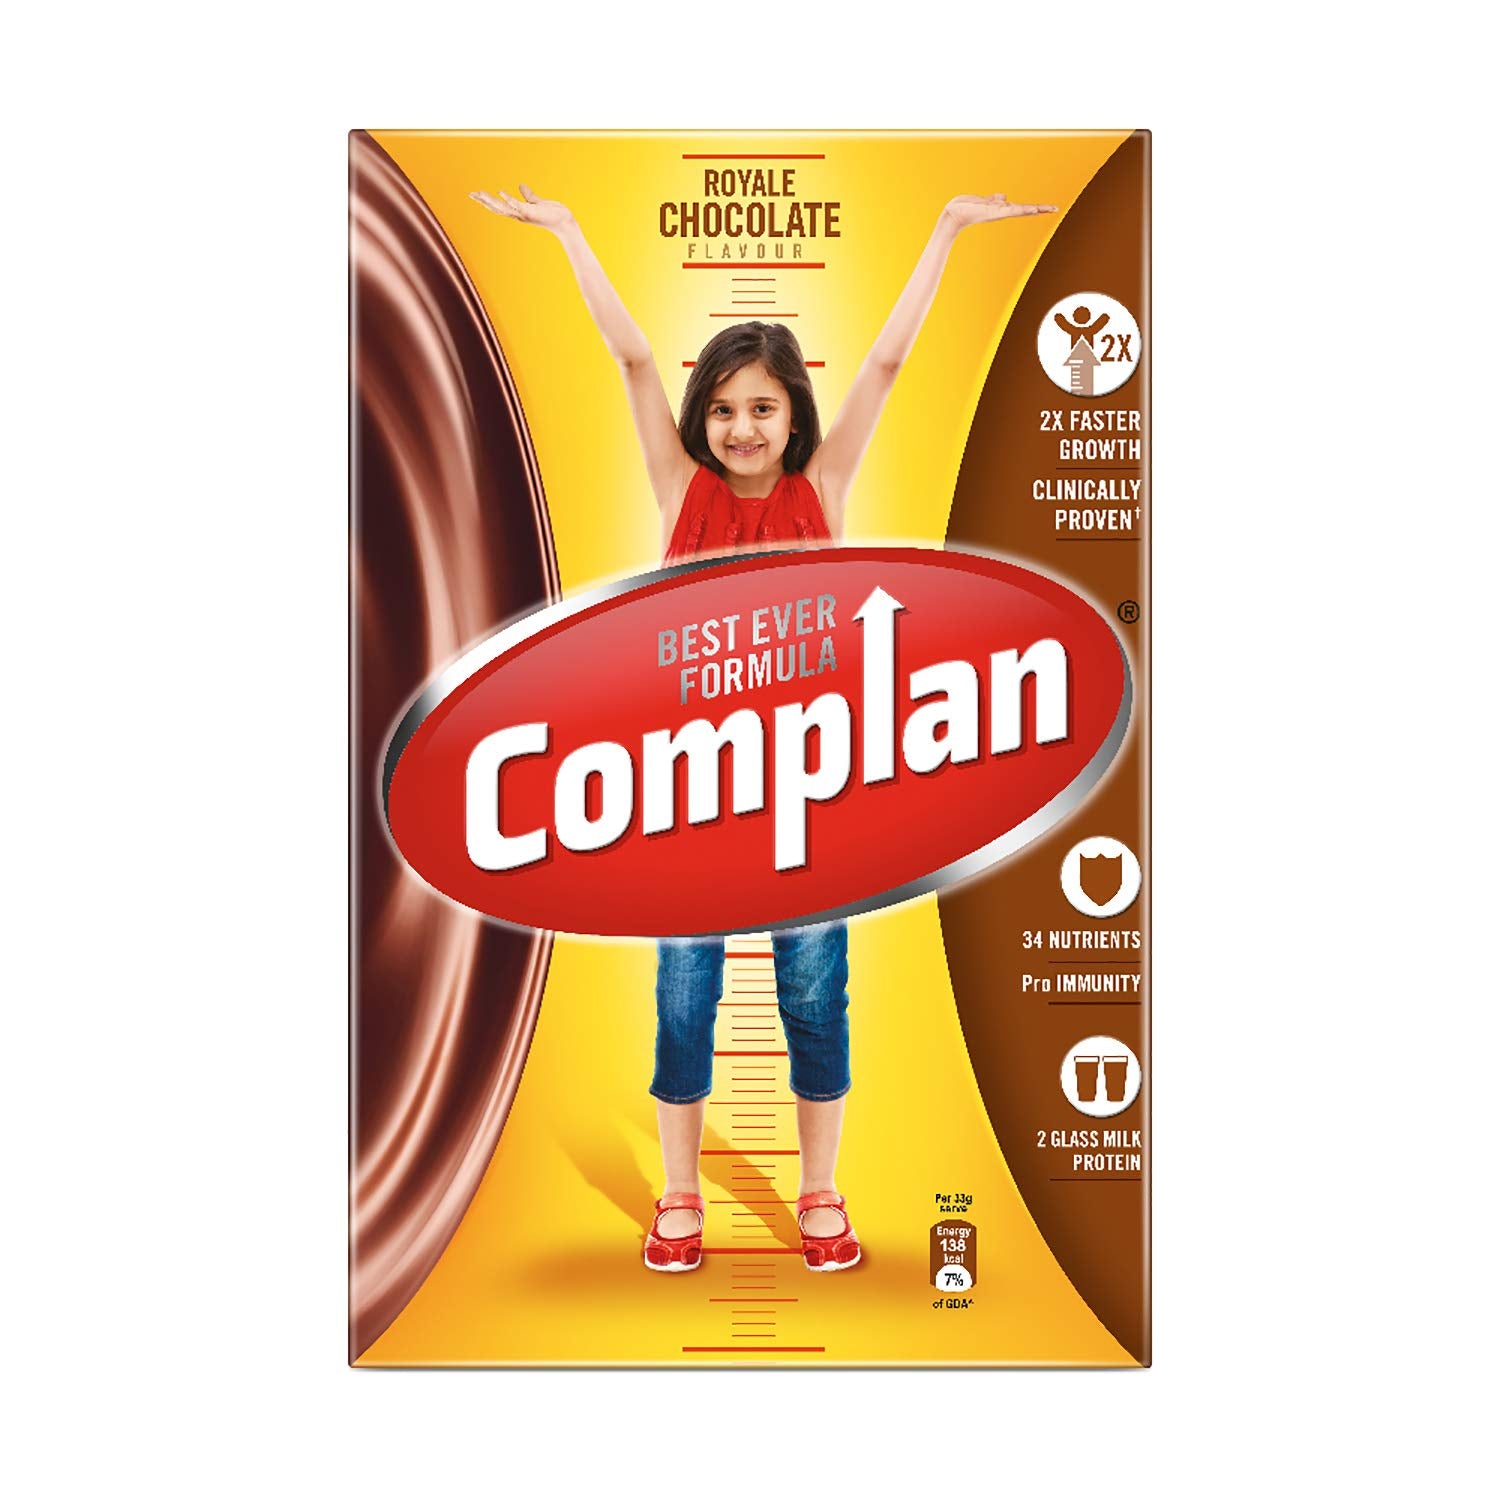 Complan Nutrition and Health Drink (Royale Chocolate)